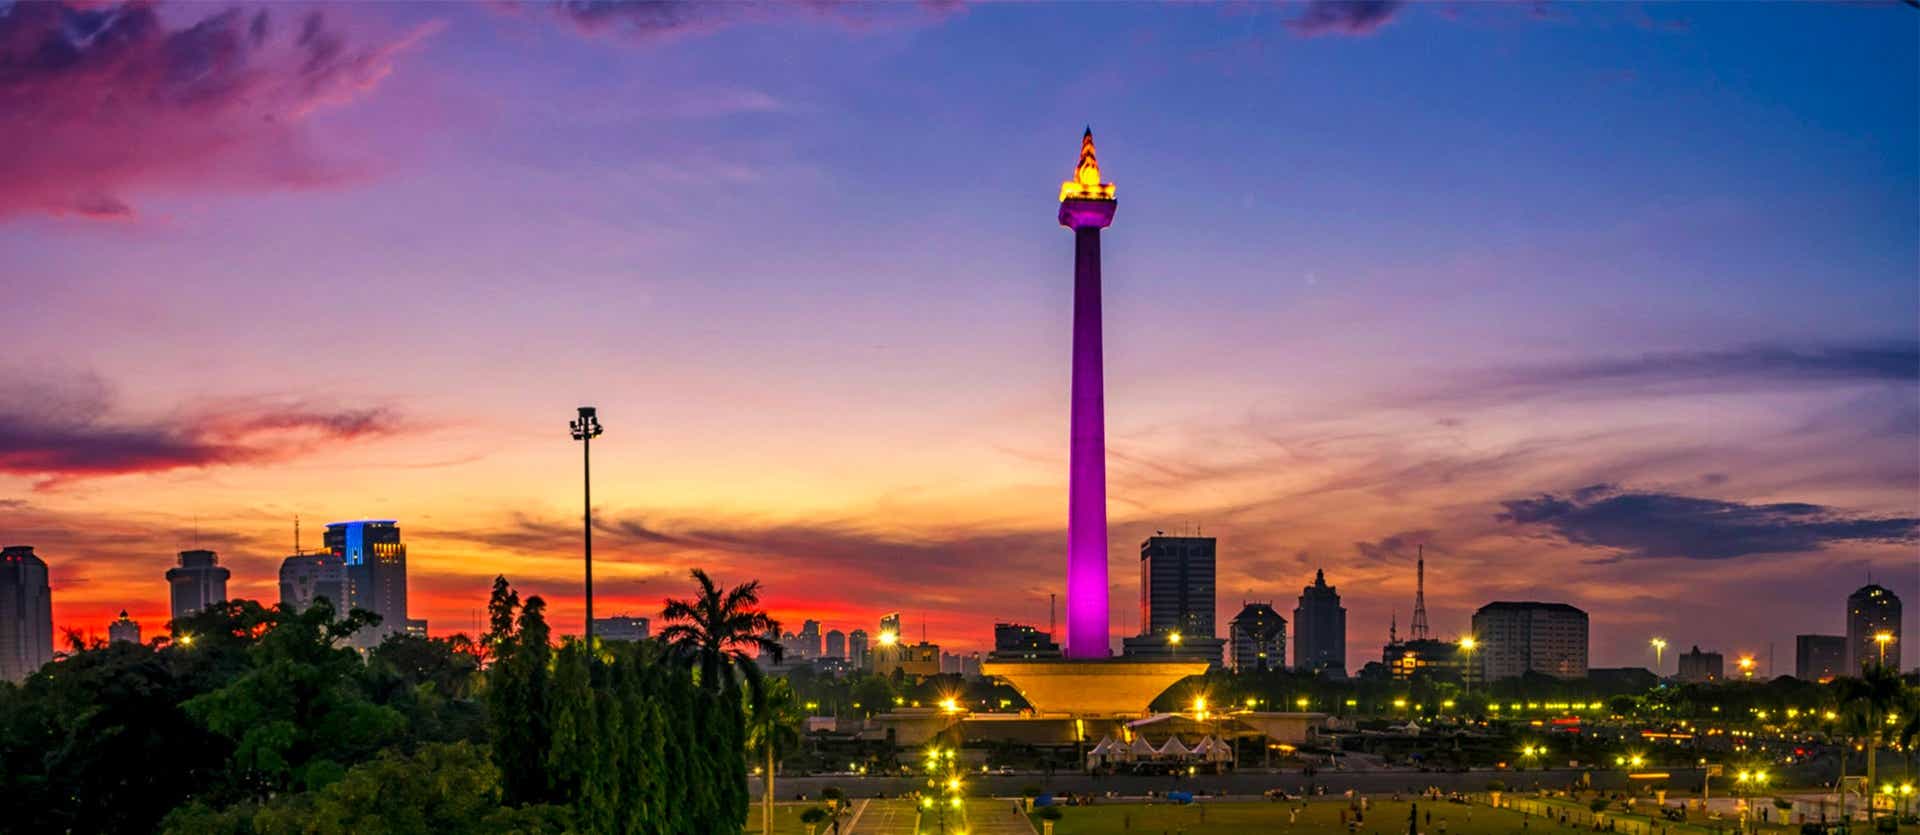 Jakarta's National Monument <span class="iconos separador"></span> Java <span class="iconos separador"></span> Indonesia